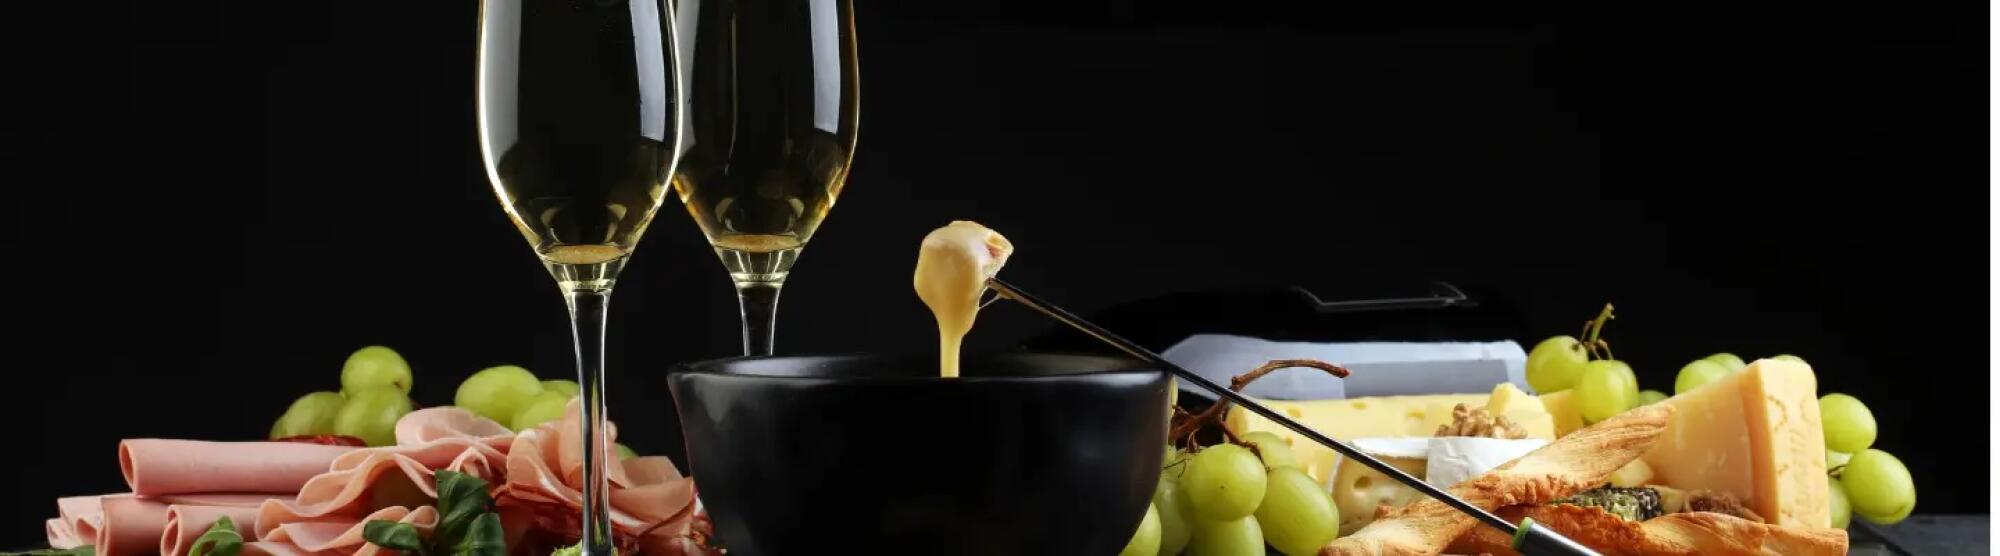 LA02_gourmet-swiss-fondue-dinner-with-assorted-cheeses-picture-id639351724